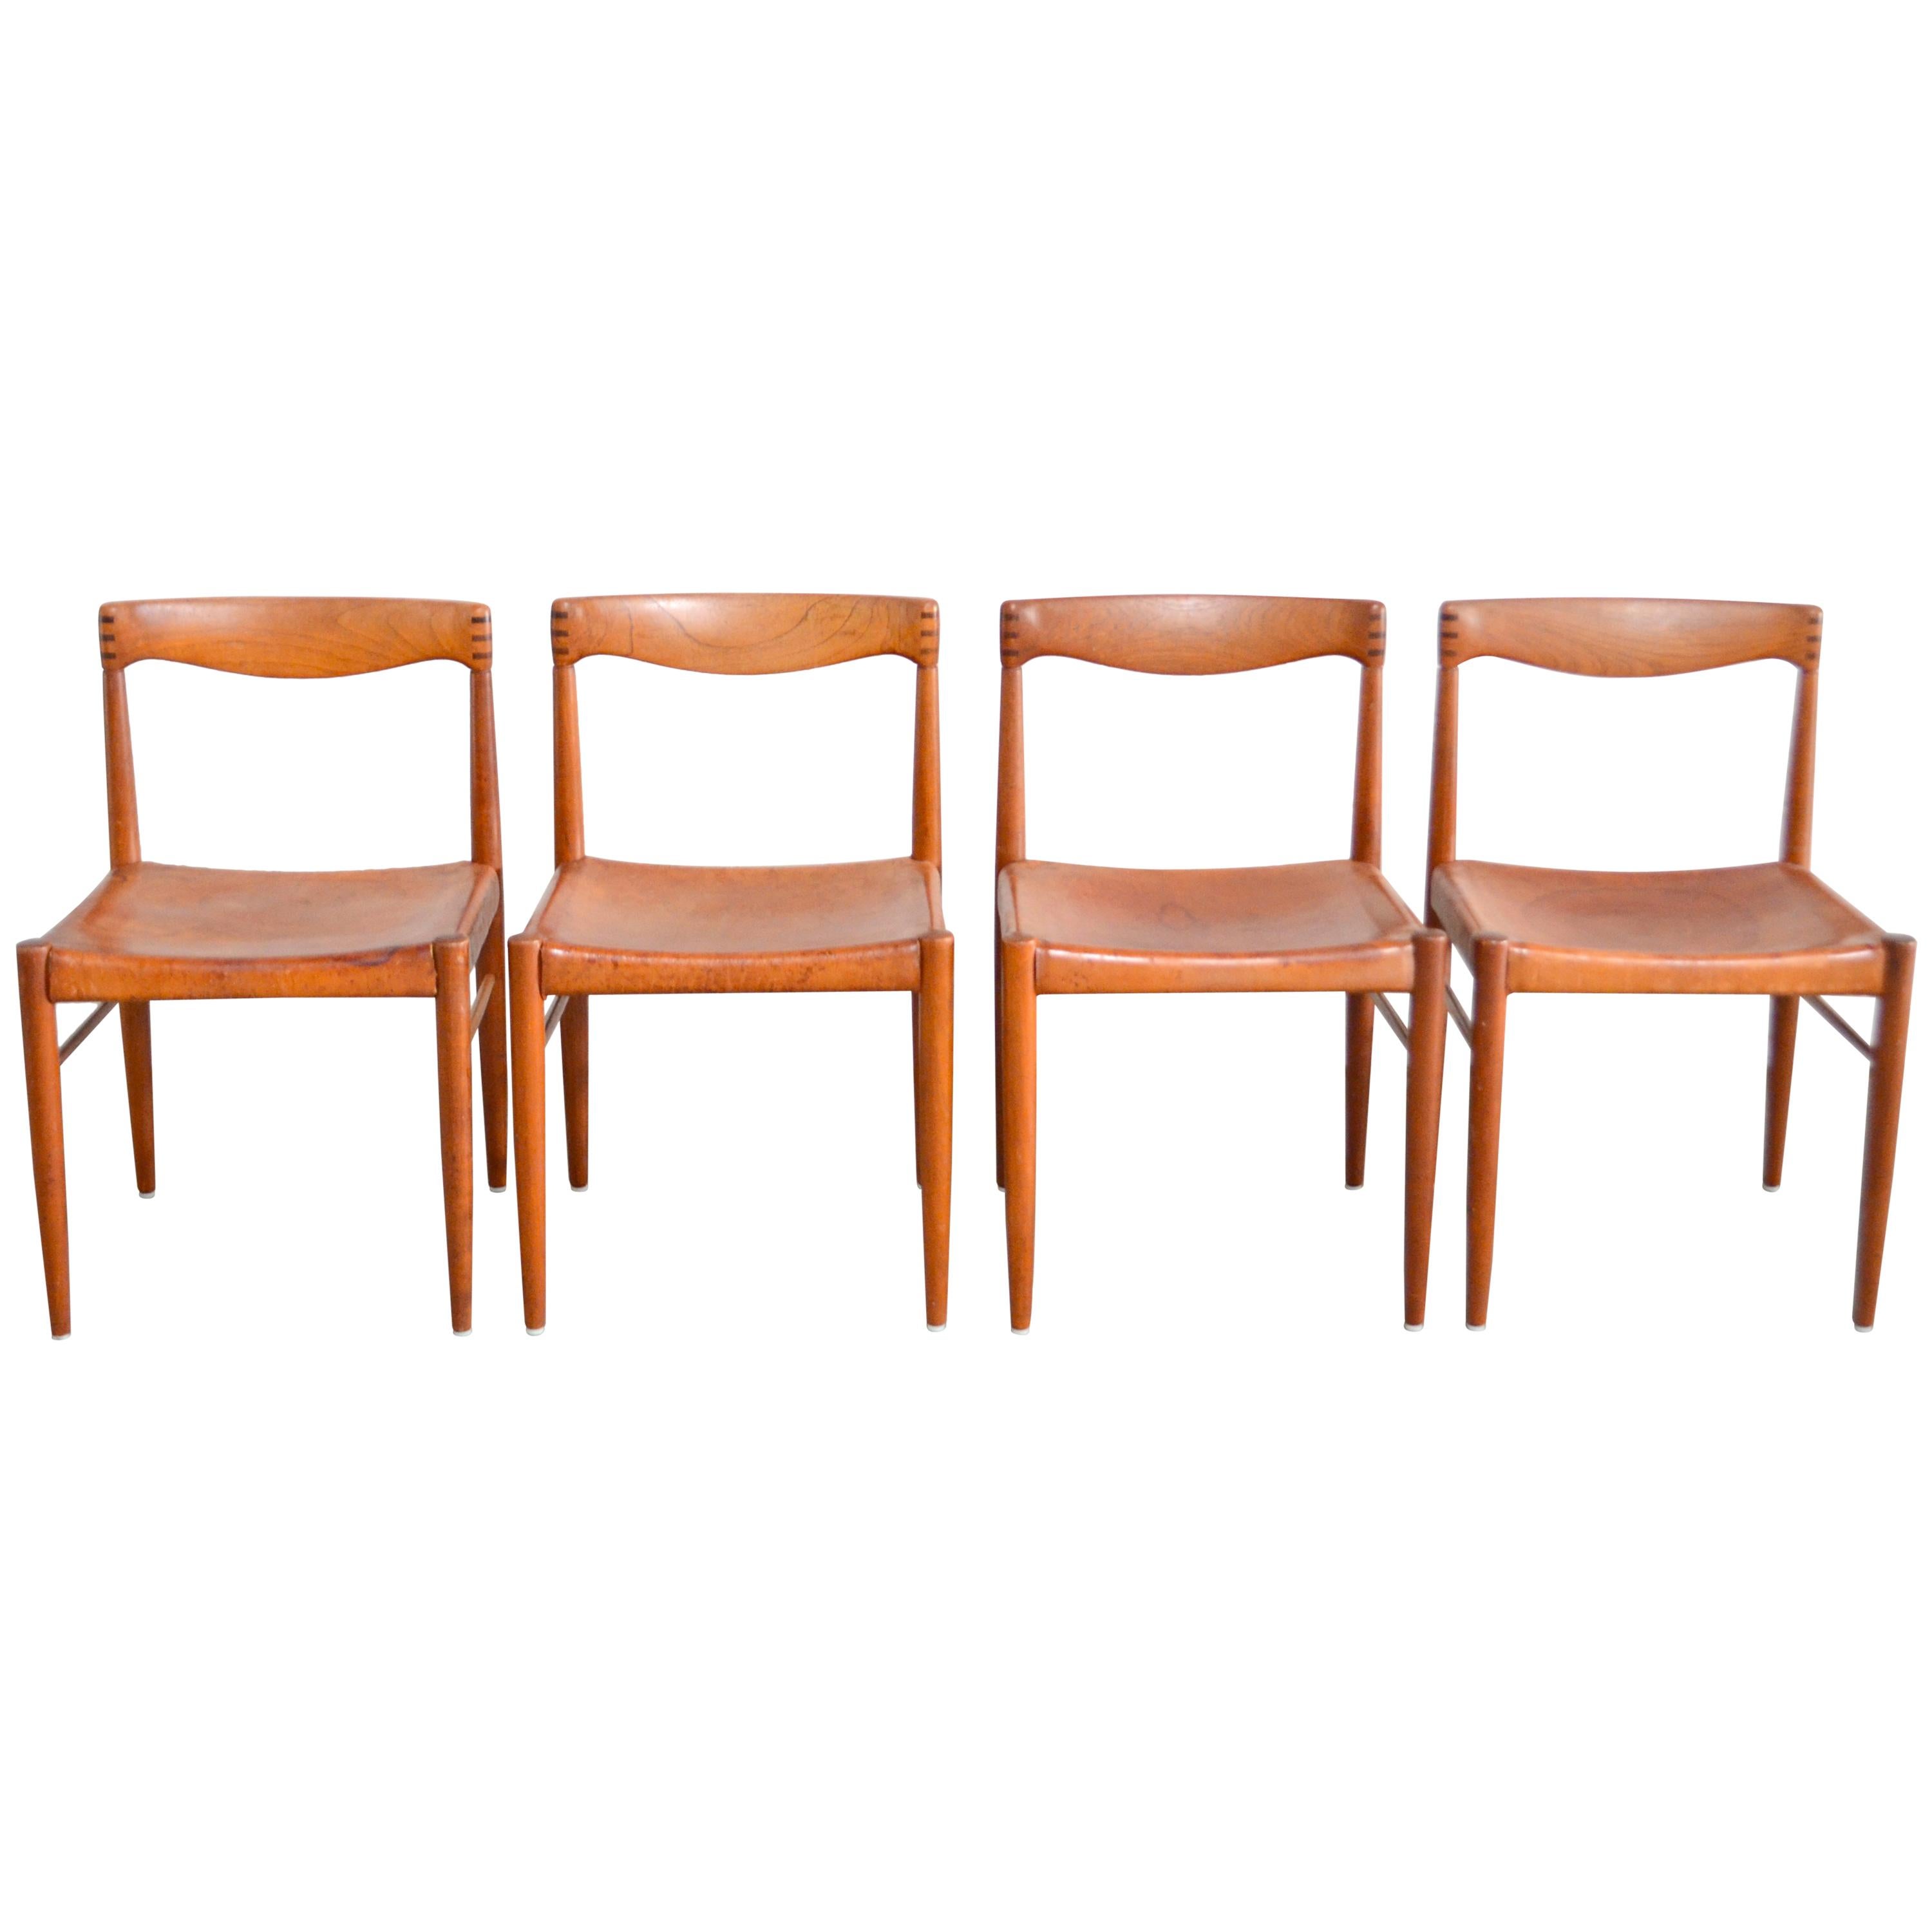 Henry W. Klein Cognac Saddle Leather Dining Chairs for Bramin Set of 4